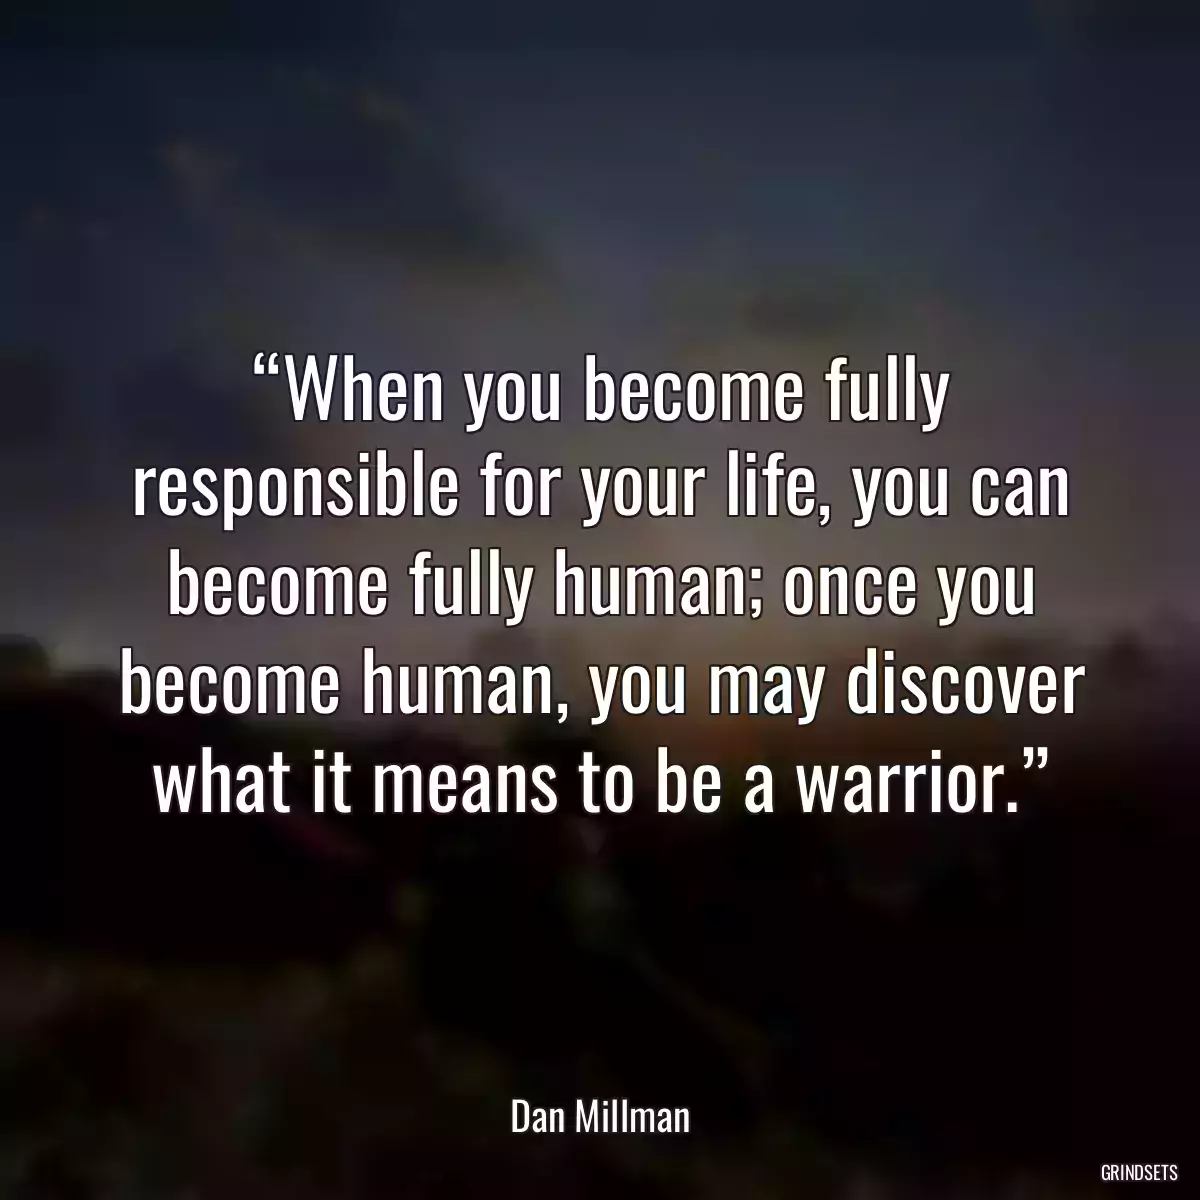 “When you become fully responsible for your life, you can become fully human; once you become human, you may discover what it means to be a warrior.”